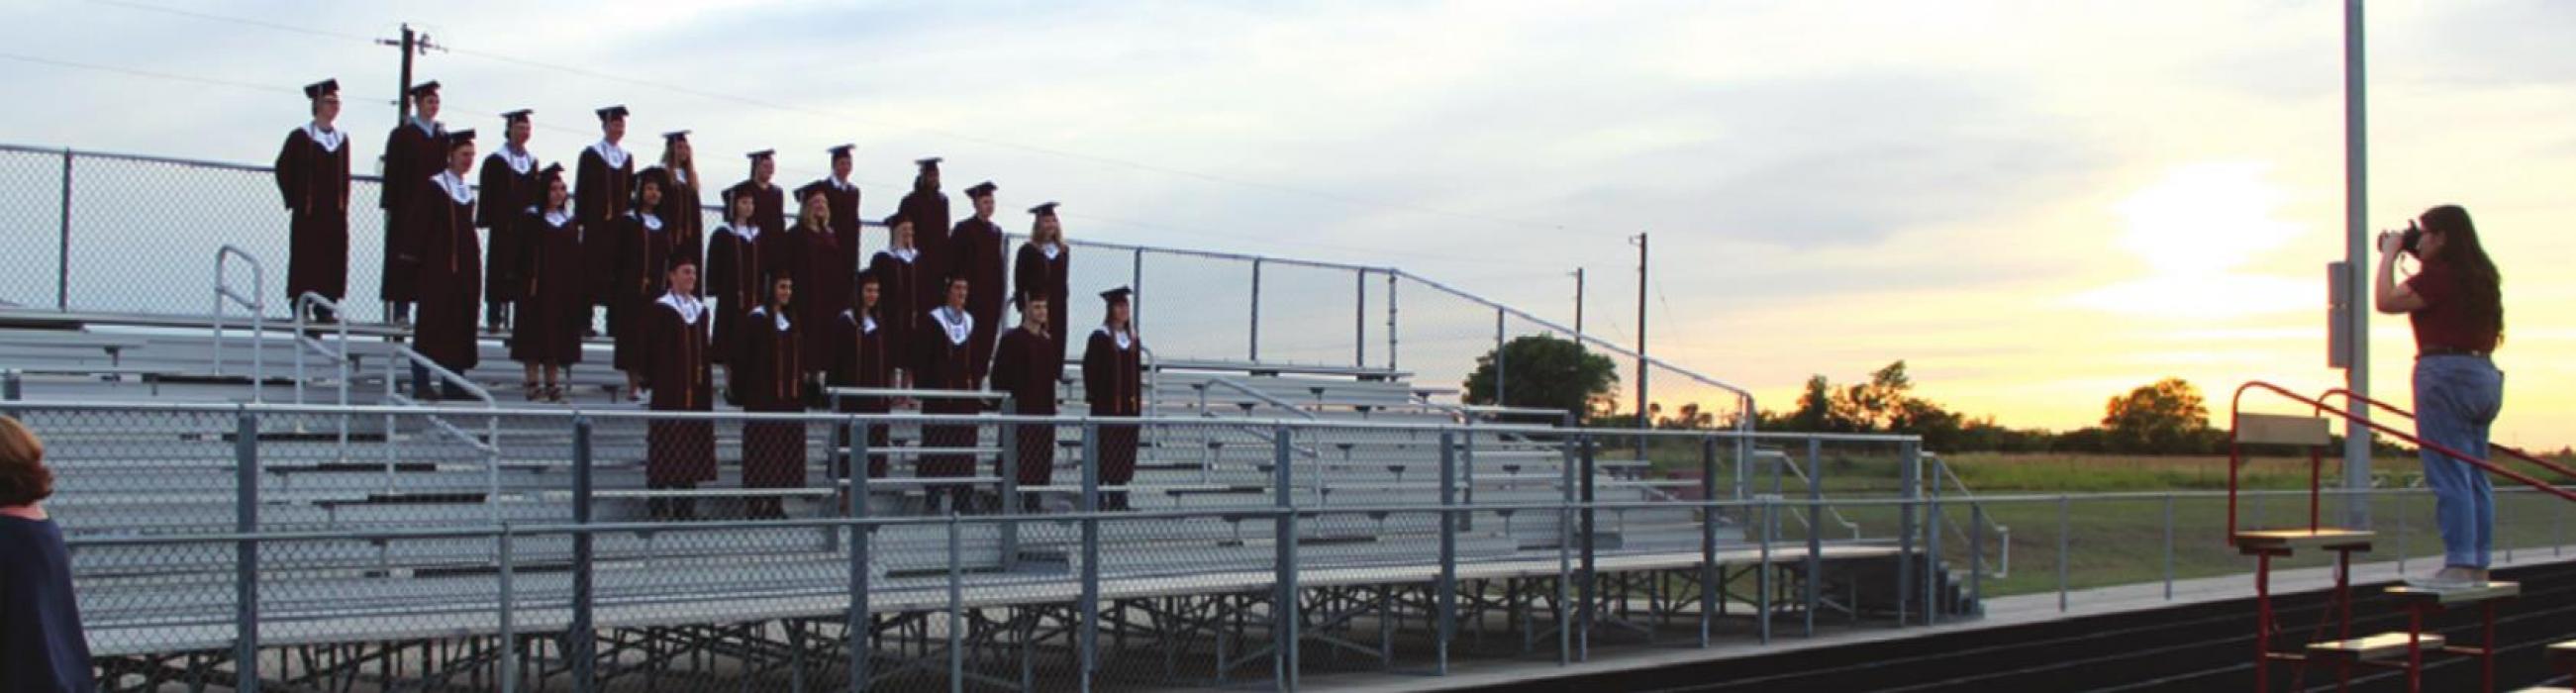 As the sun sets, Grace-Anne Matocha takes a group photo of the Fayetteville seniors before the ceremony.